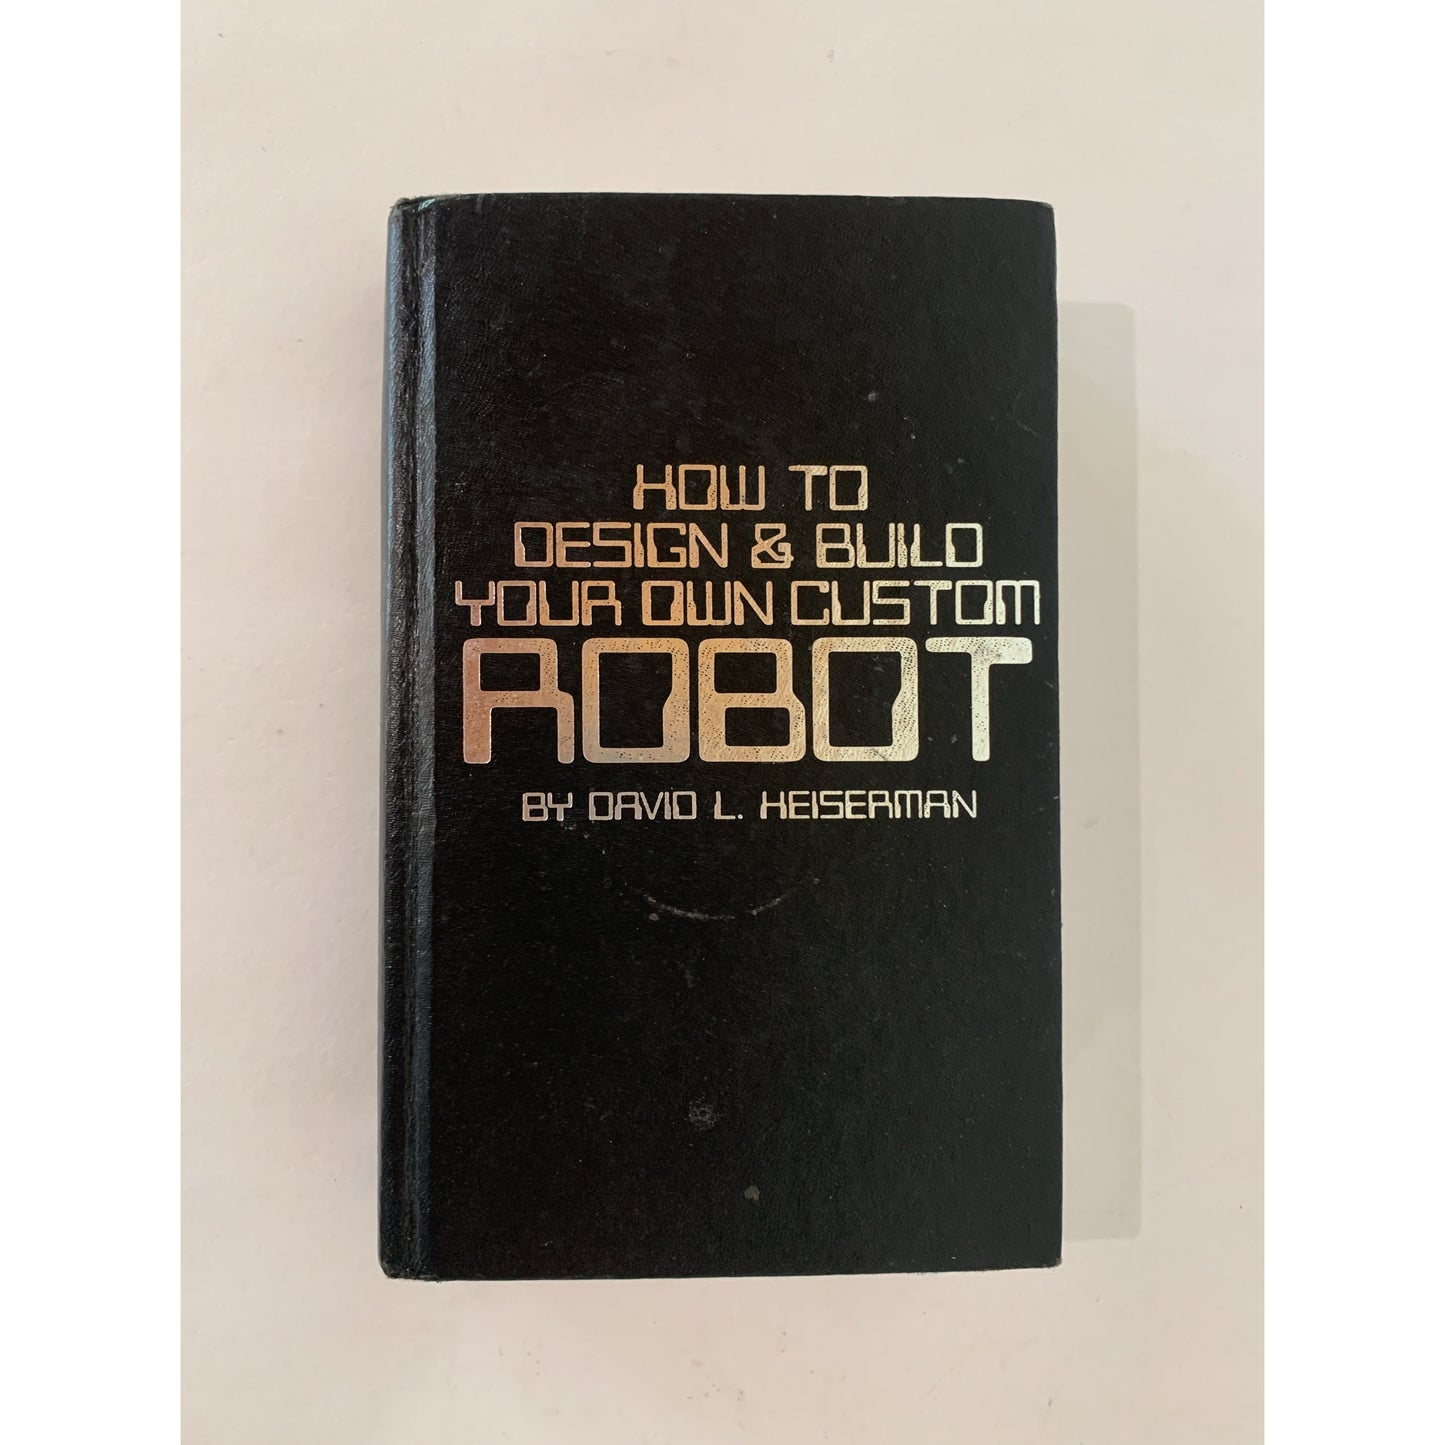 How To Design and Build Your Own Custom Robot, Vintage 1981 Hardcover